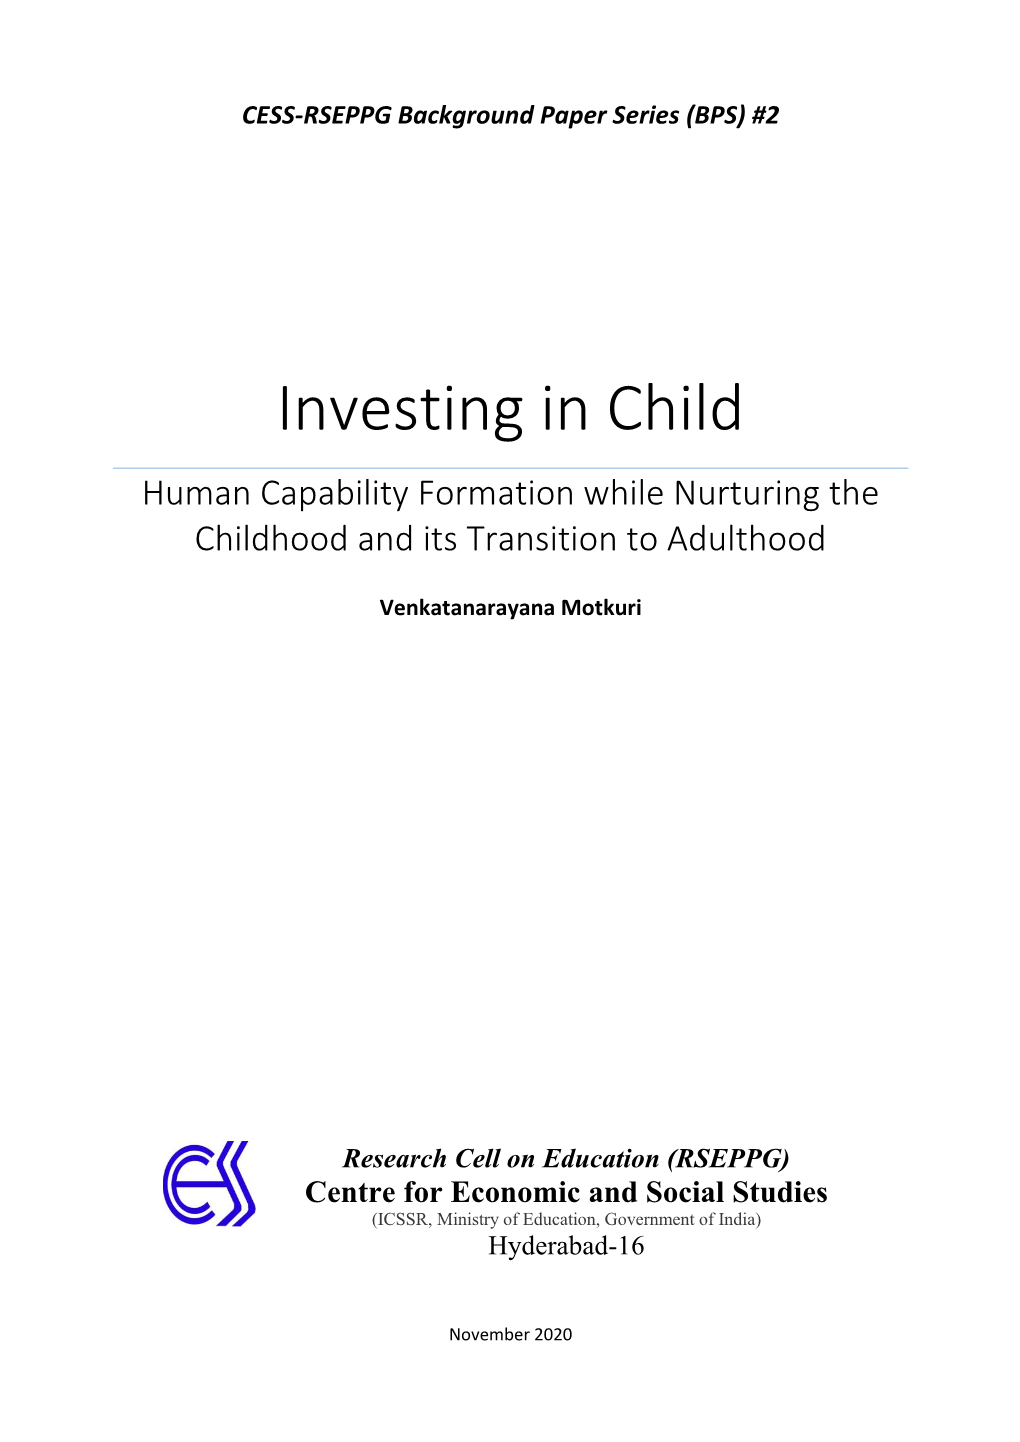 Investing in Child Human Capability Formation While Nurturing the Childhood and Its Transition to Adulthood